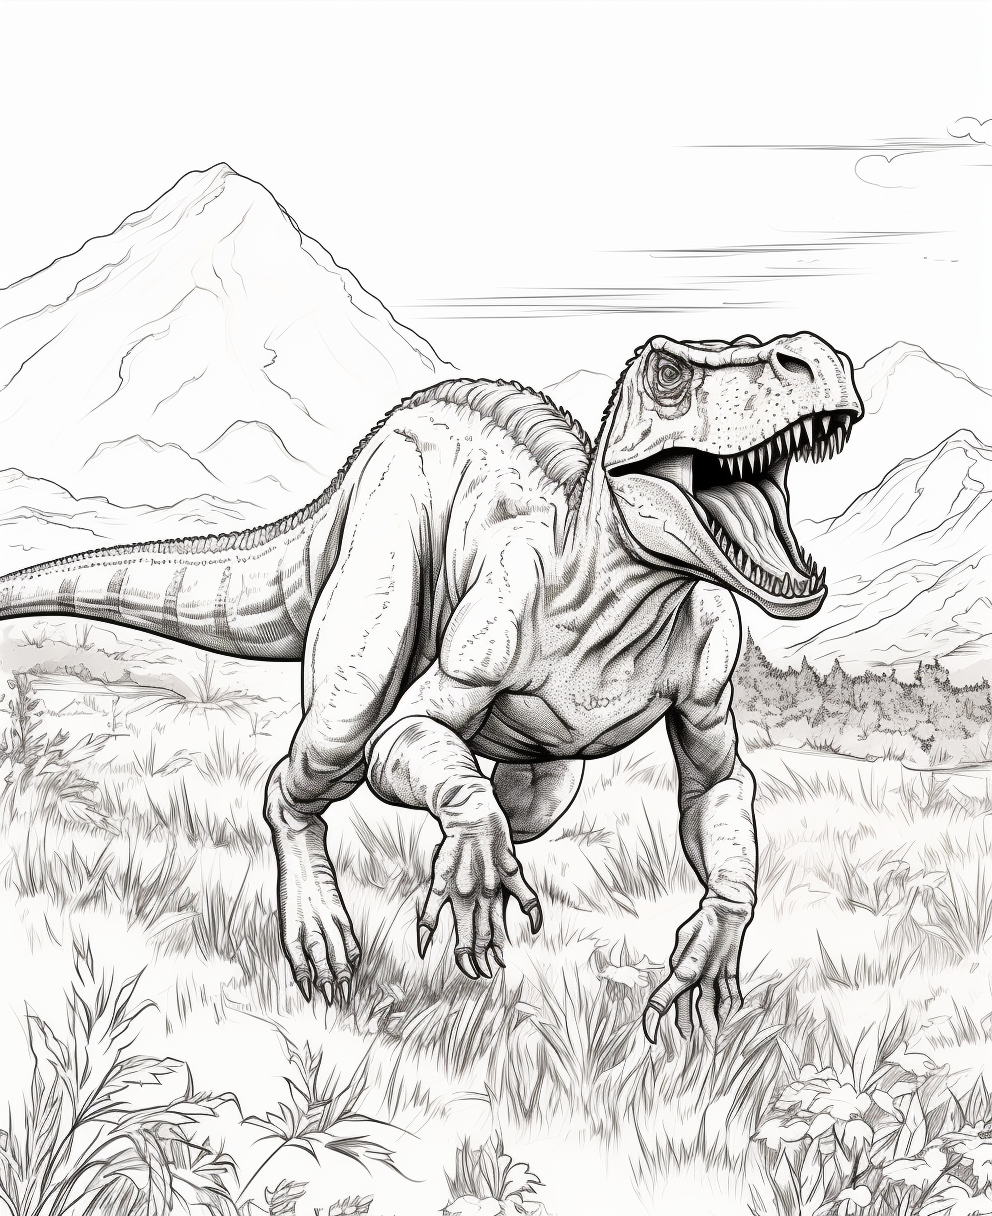 Ceratosaurus Dinosaur | Coloring books for children 3, 4, 5, 6, 7, 8 years old: 5 coloring pages